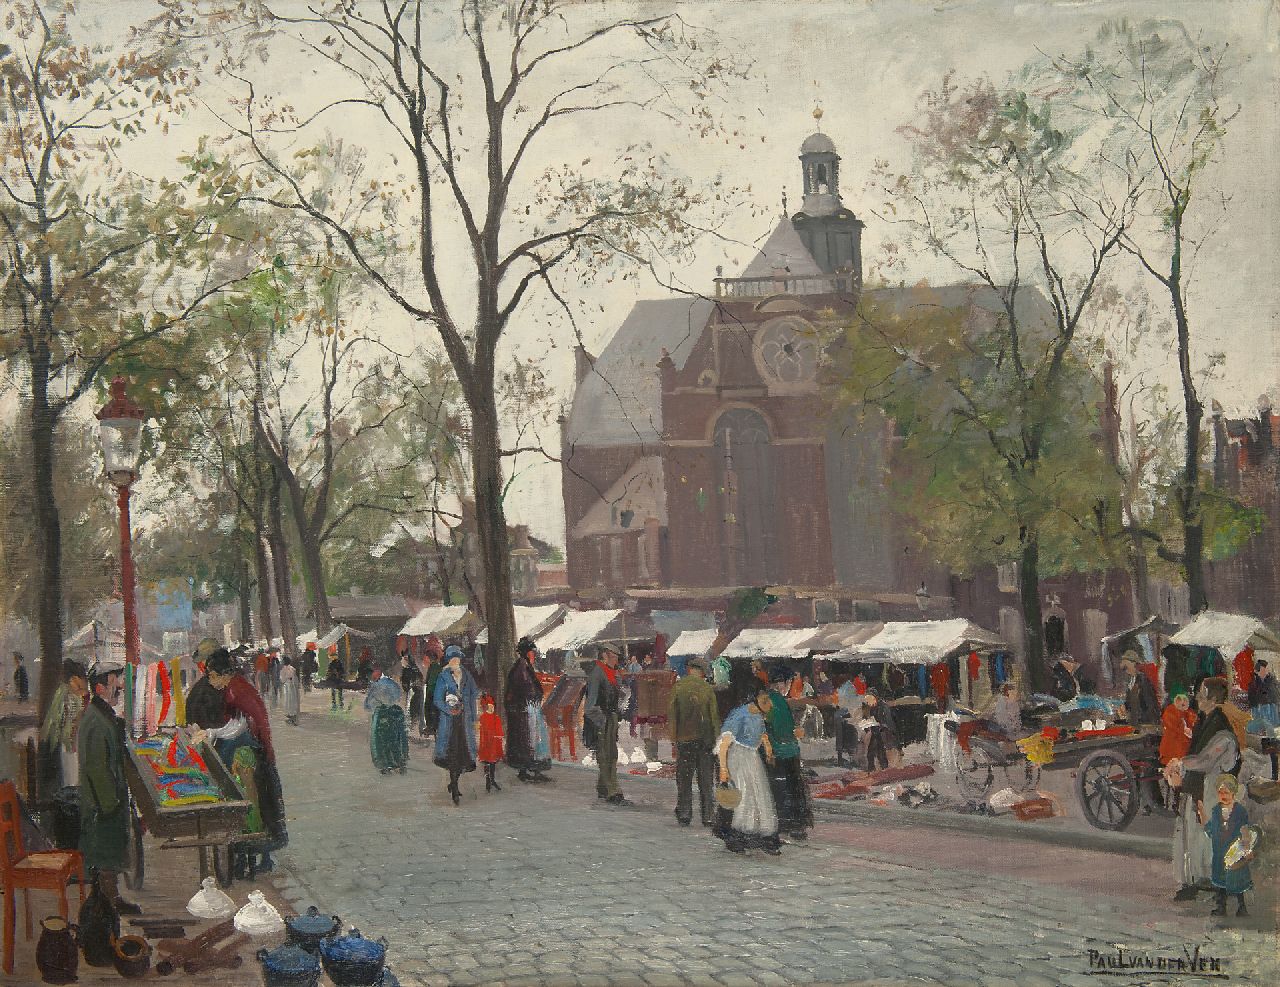 Paul van der Ven | Marketday on the Noordermarkt, Amsterdam, oil on canvas, 84.4 x 109.8 cm, signed l.r. and on the stretcher